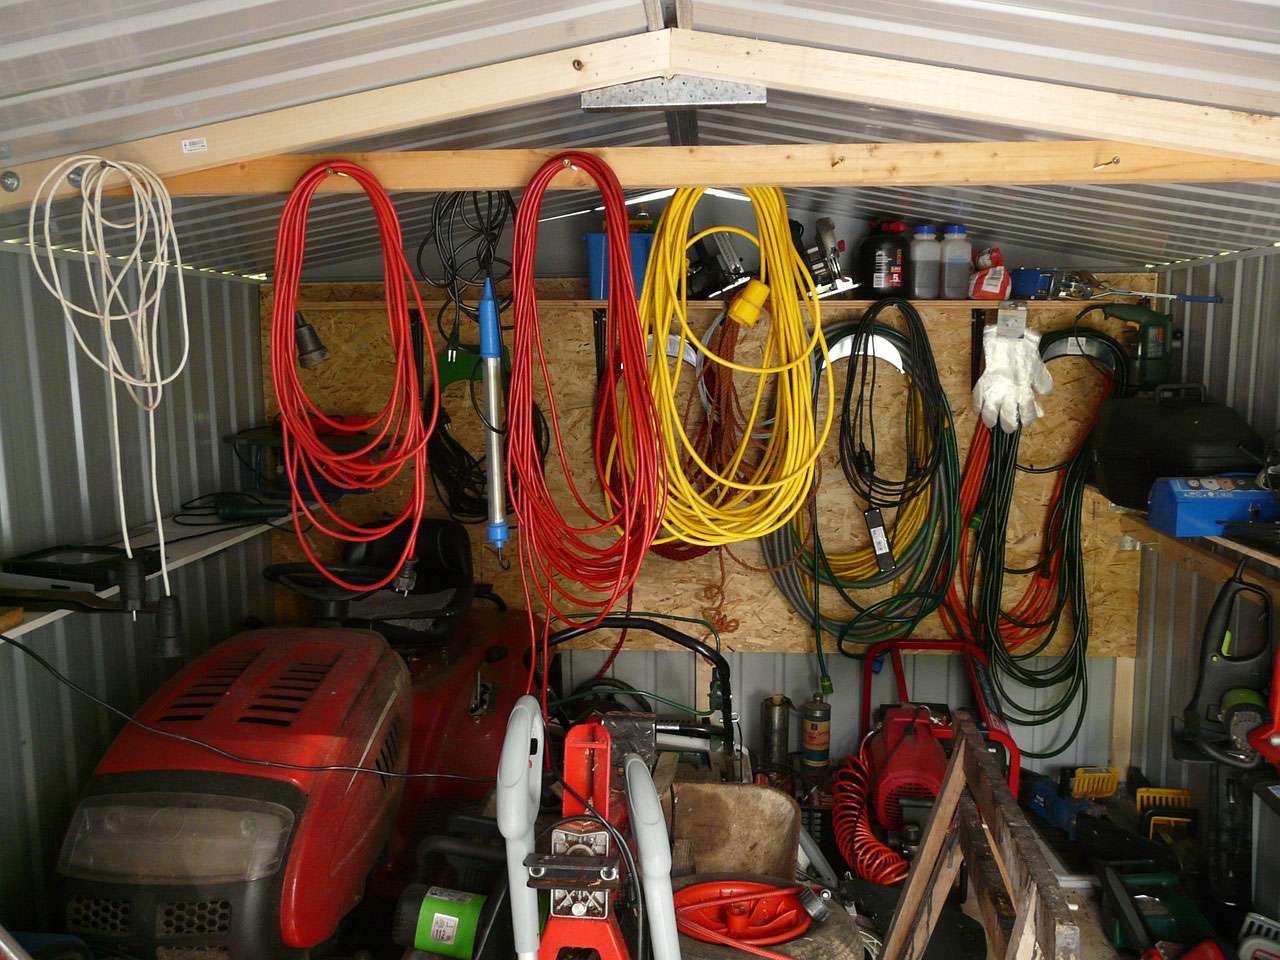 House Clearance, Garage Clearance, Workshop Clearance and Office Clearance services in Berkshire, Hampshire and Surrey. Backyard workshop tools.